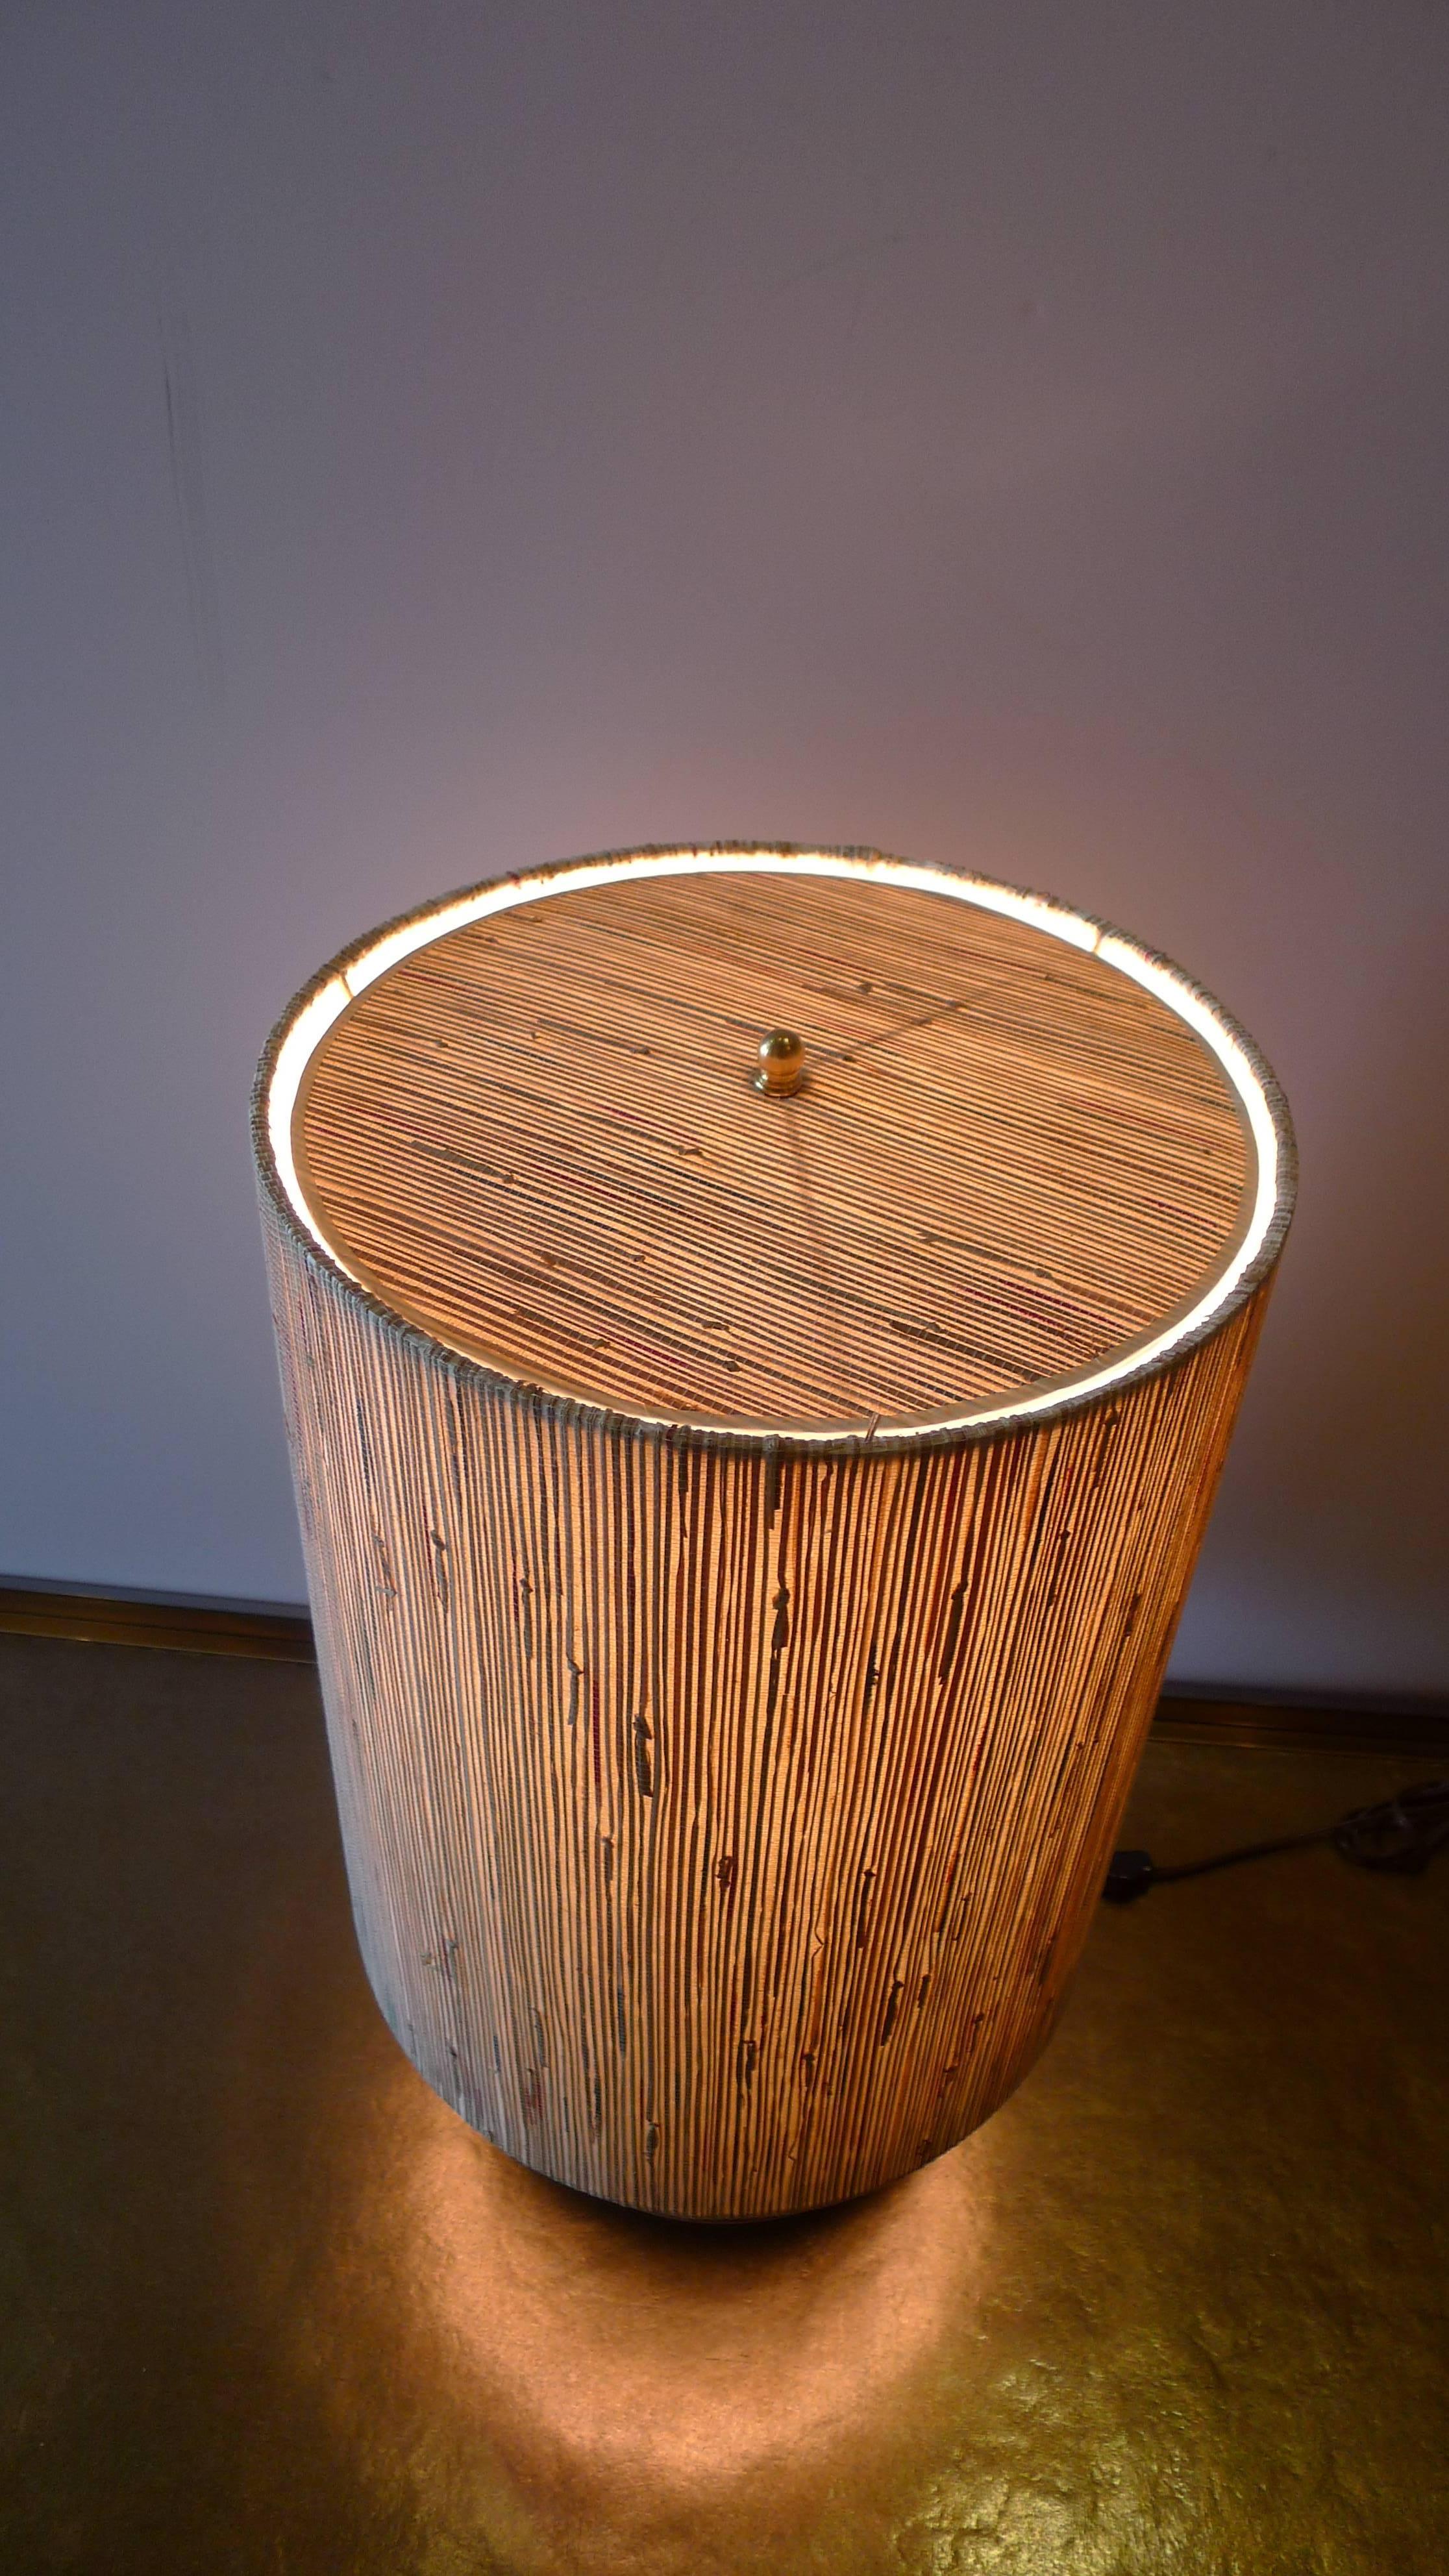 New modern brass table lamp with custom grasscloth shade by Paul Marra. Currently a pair available, or by order. The custom shade is made of grasscloth in subtle colors. The new electrical has online switch. The brass is unlacquered, will age over